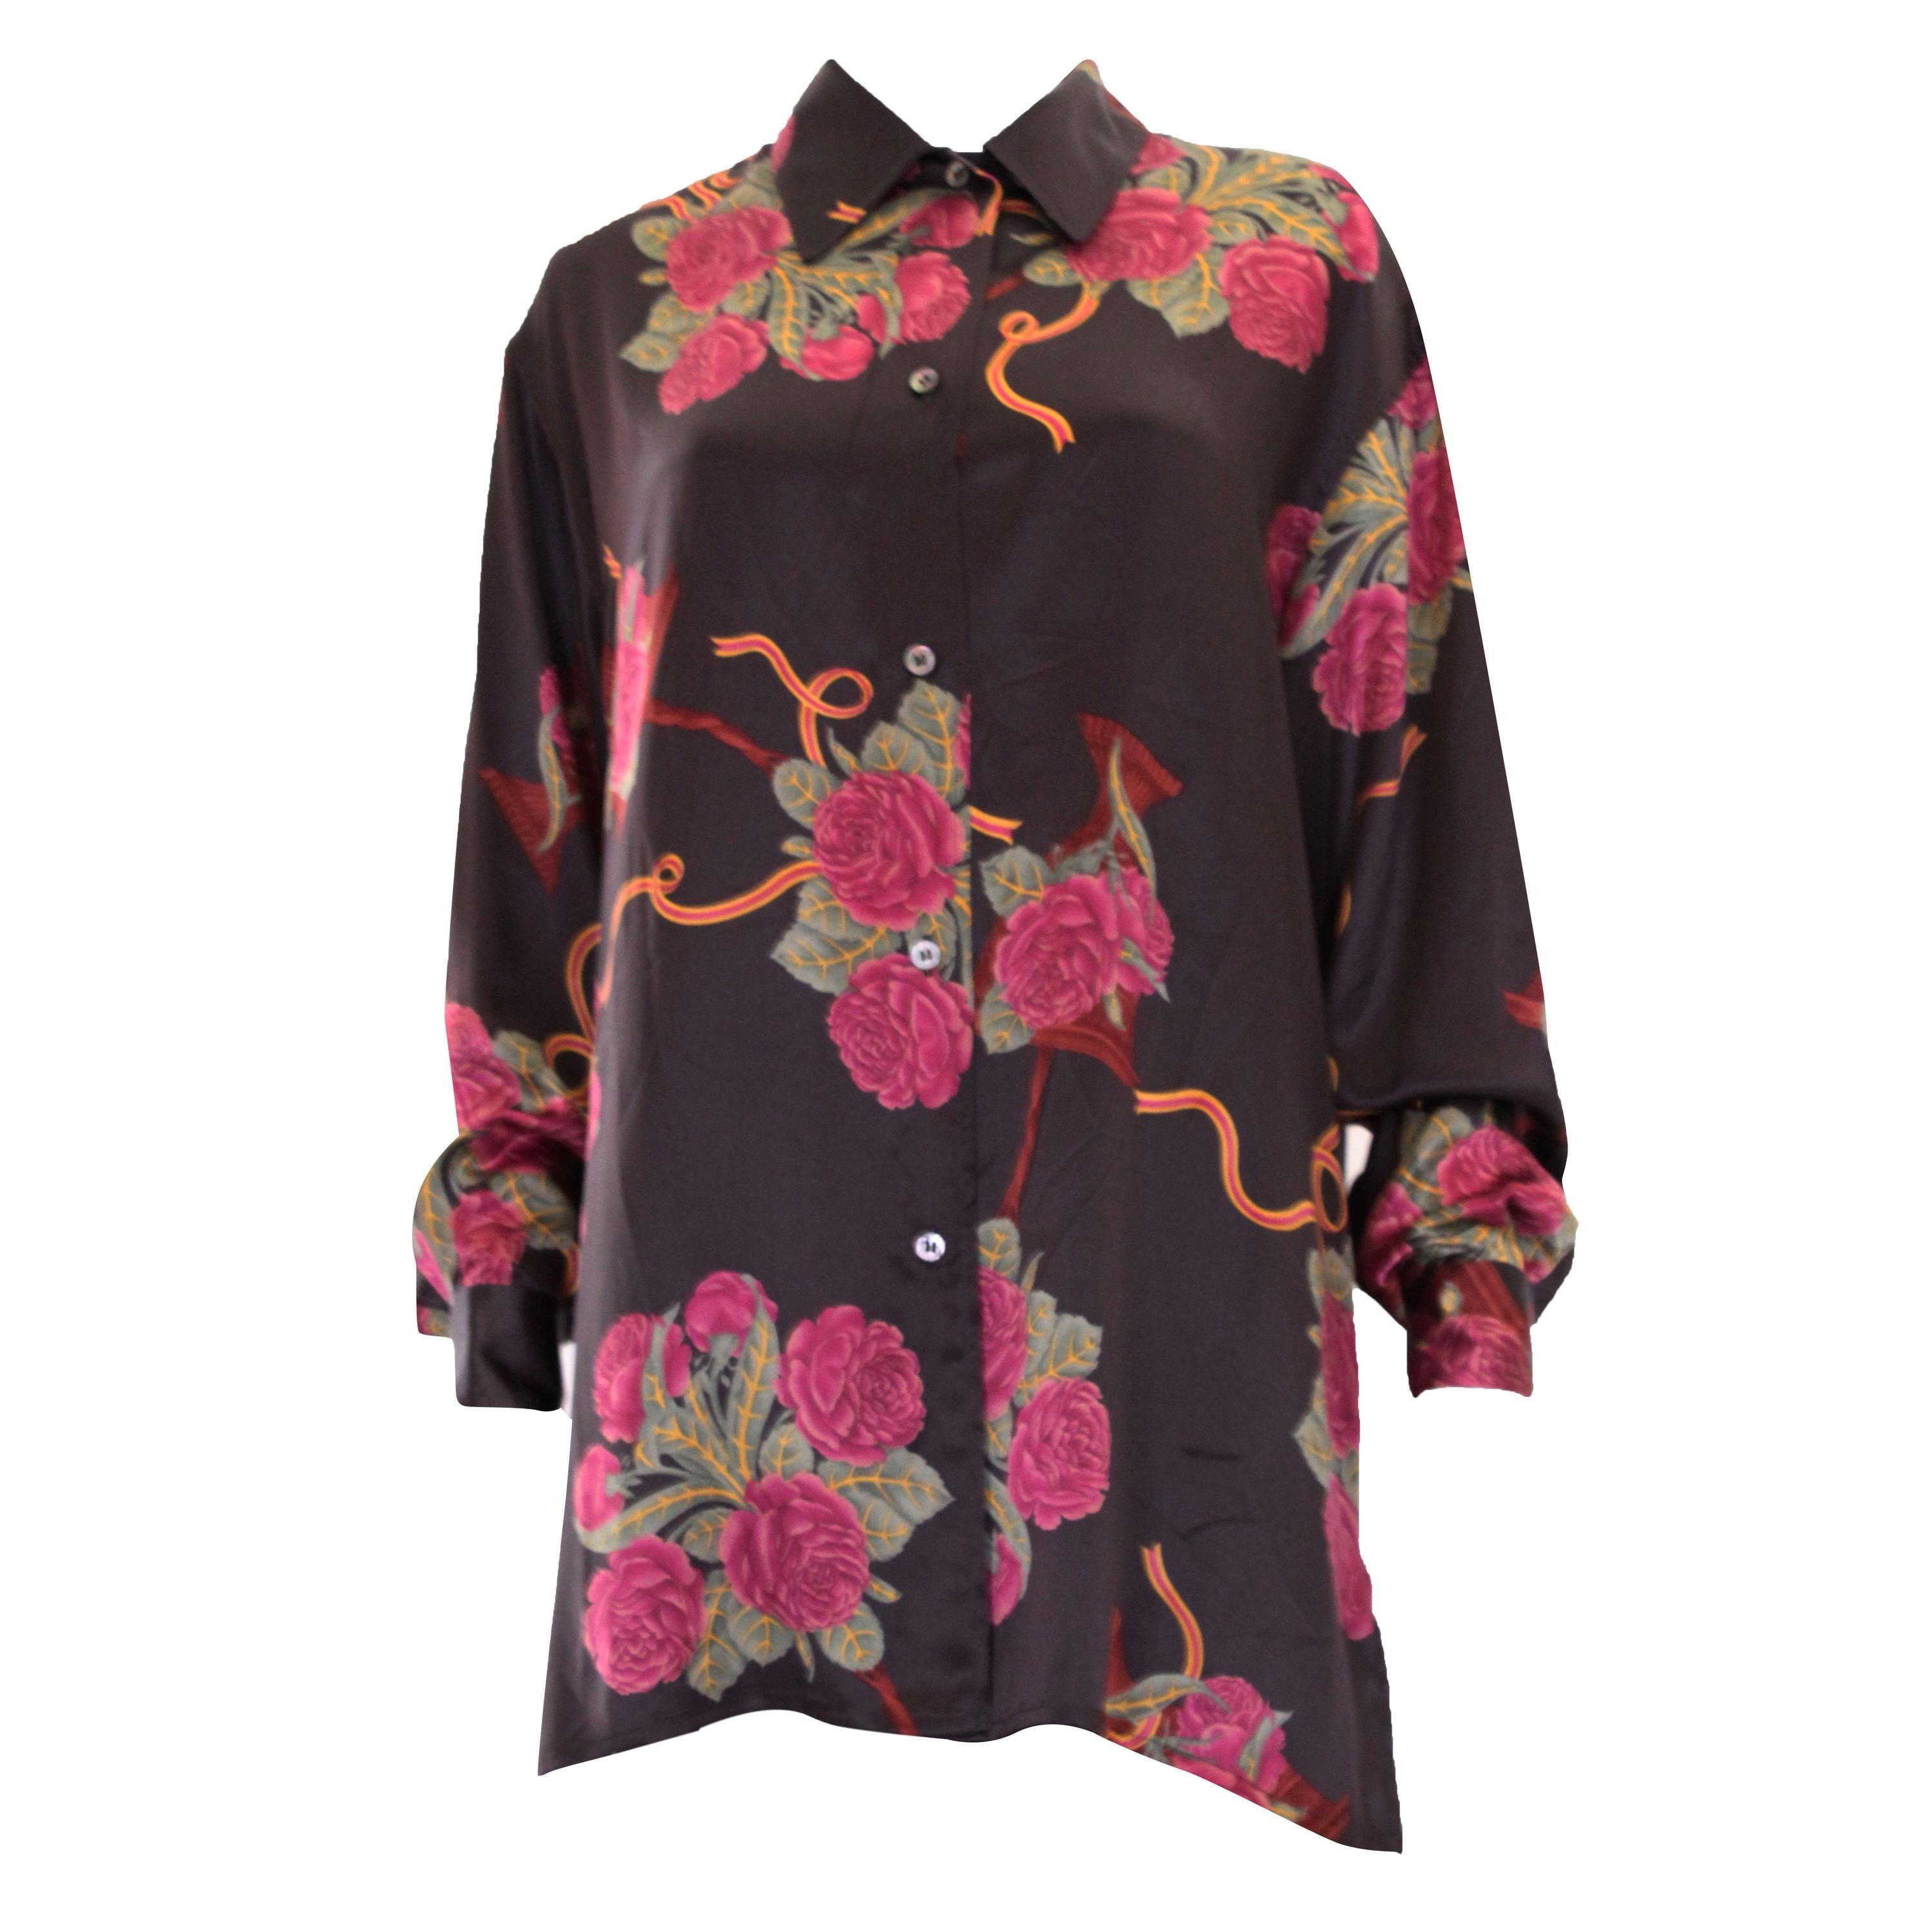 A vintage 1980s Silk floral printed Overshirt by Salvatore Ferragamo